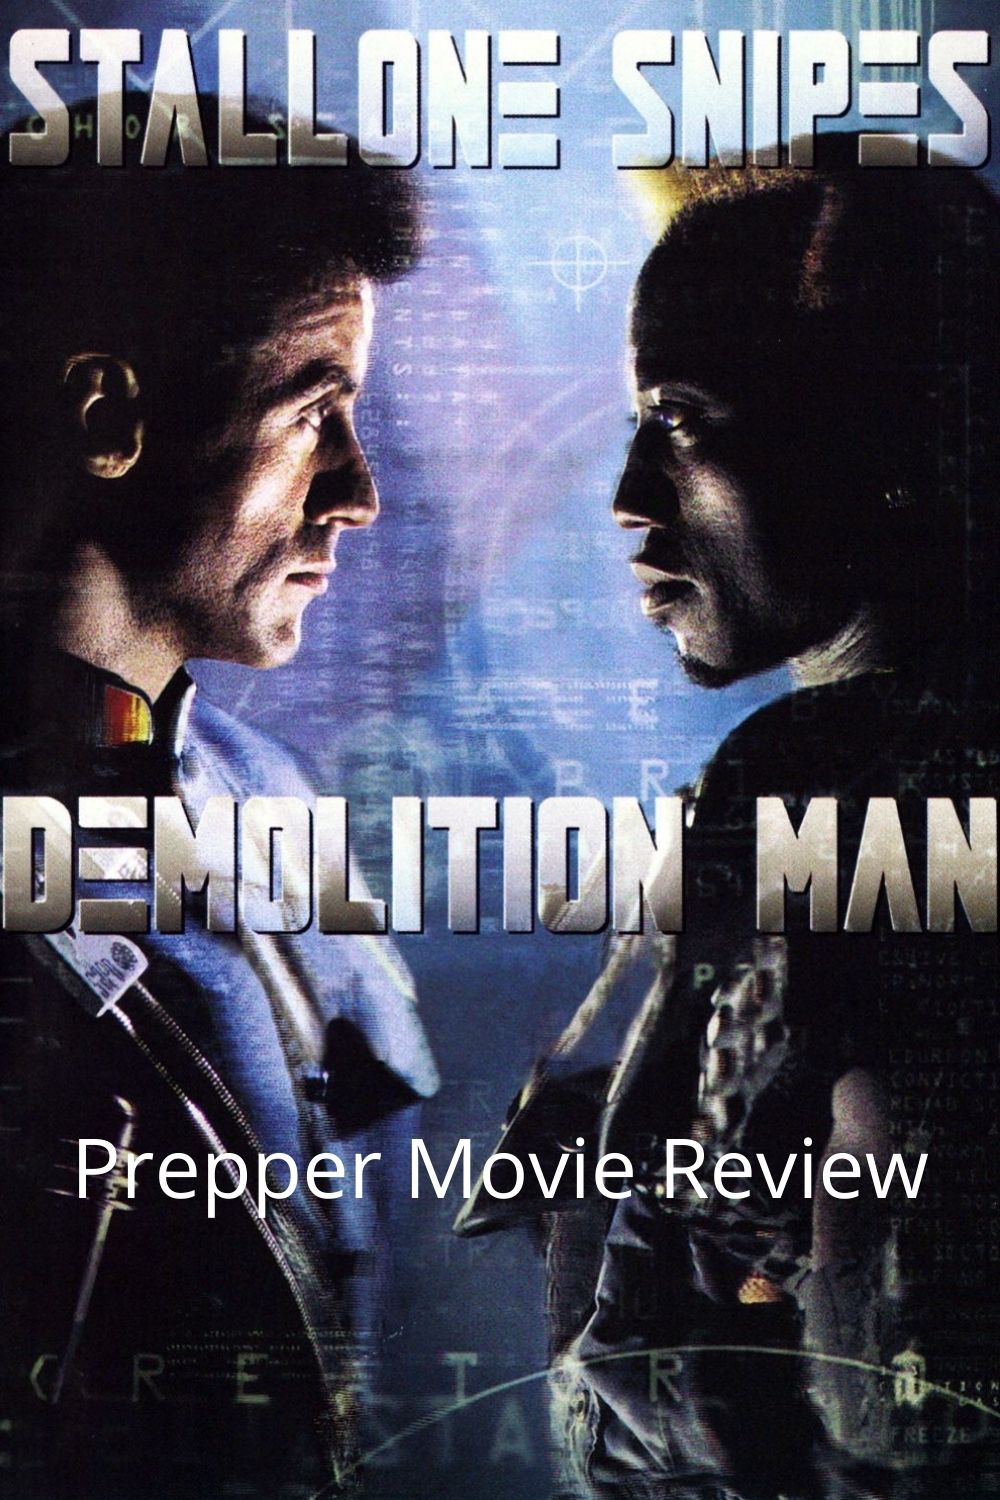 Demolition Man Review: An Unlikely Movie for Preppers